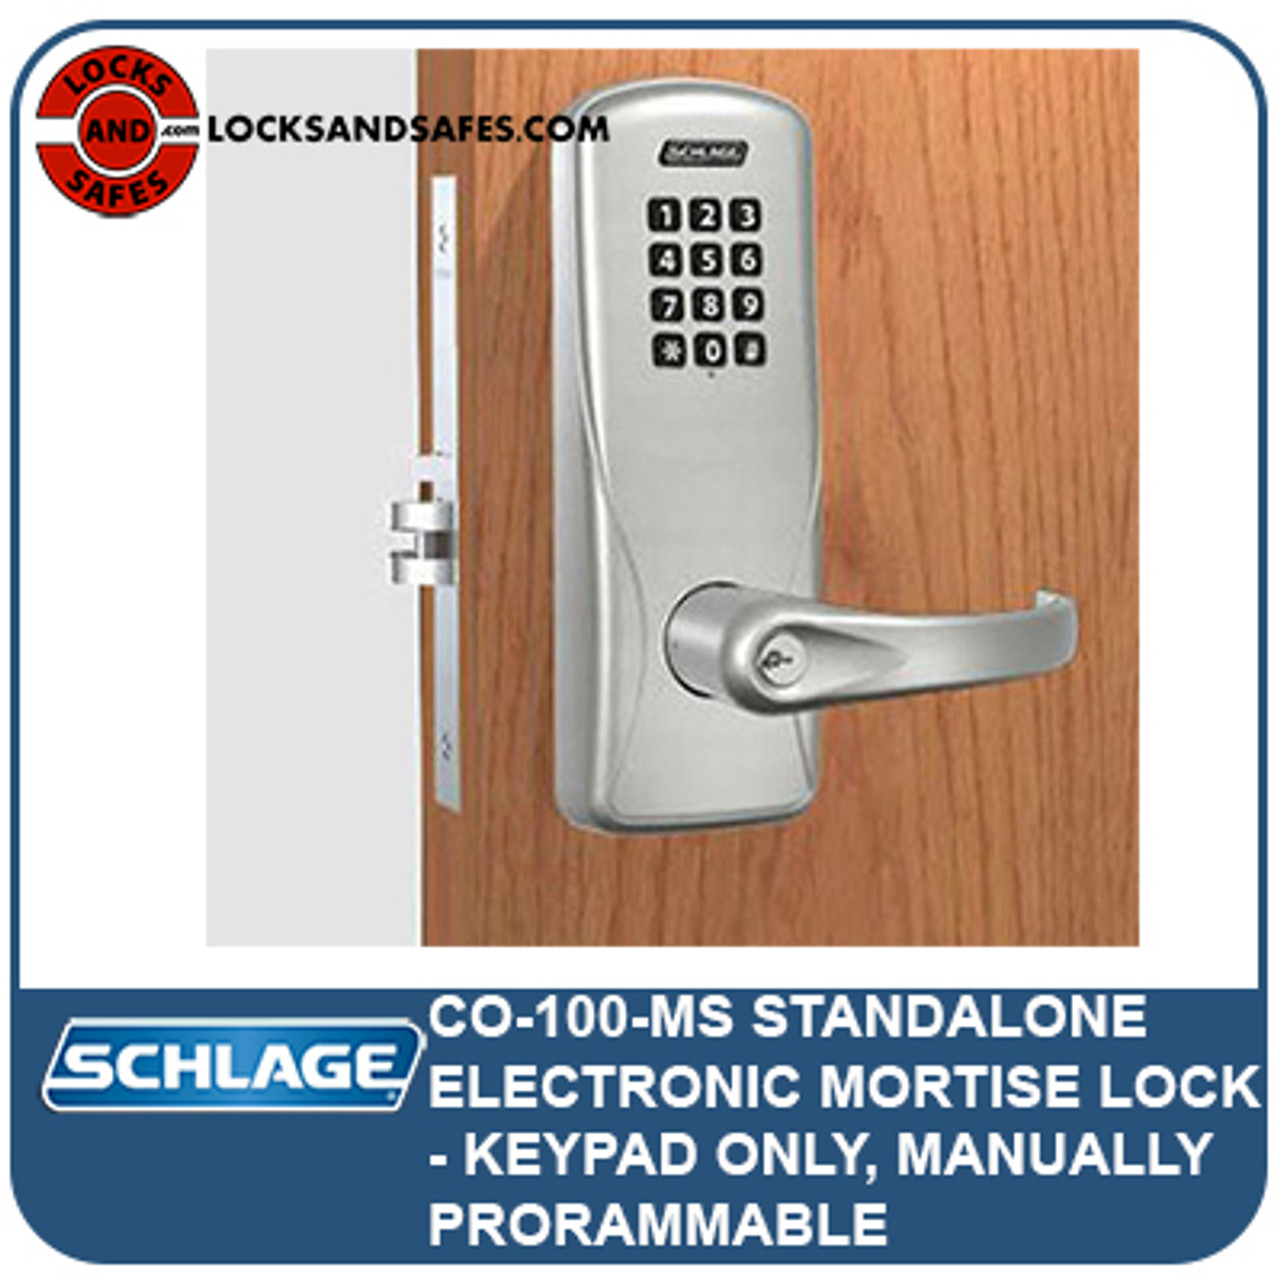 Mortise Locks with Keypad Reader Schlage CO-100-MS-KP